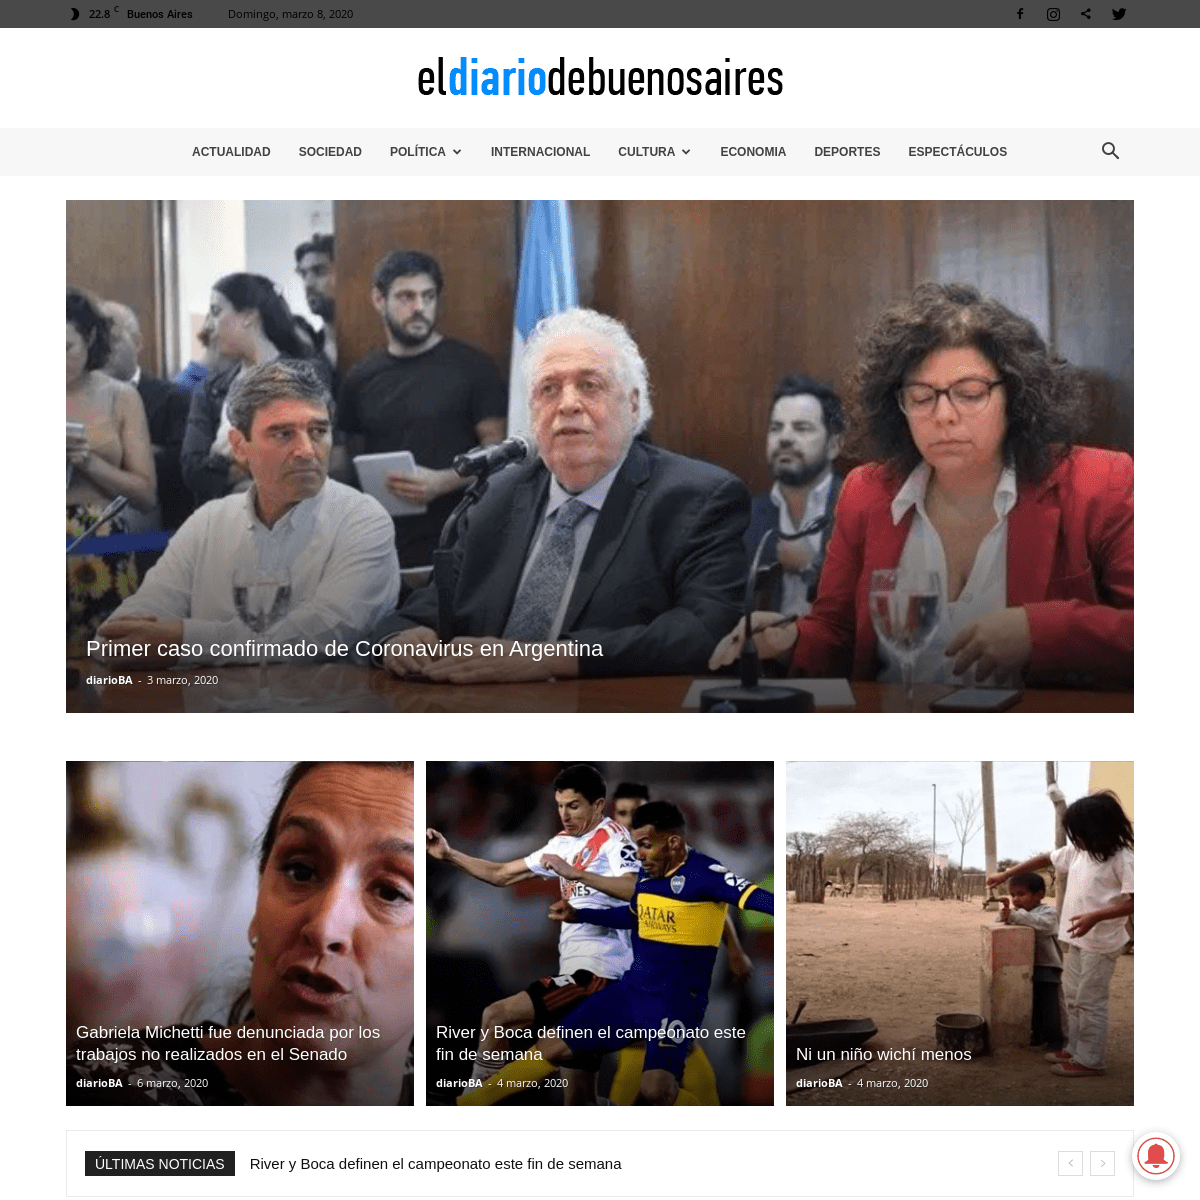 A complete backup of eldiariodebuenosaires.com